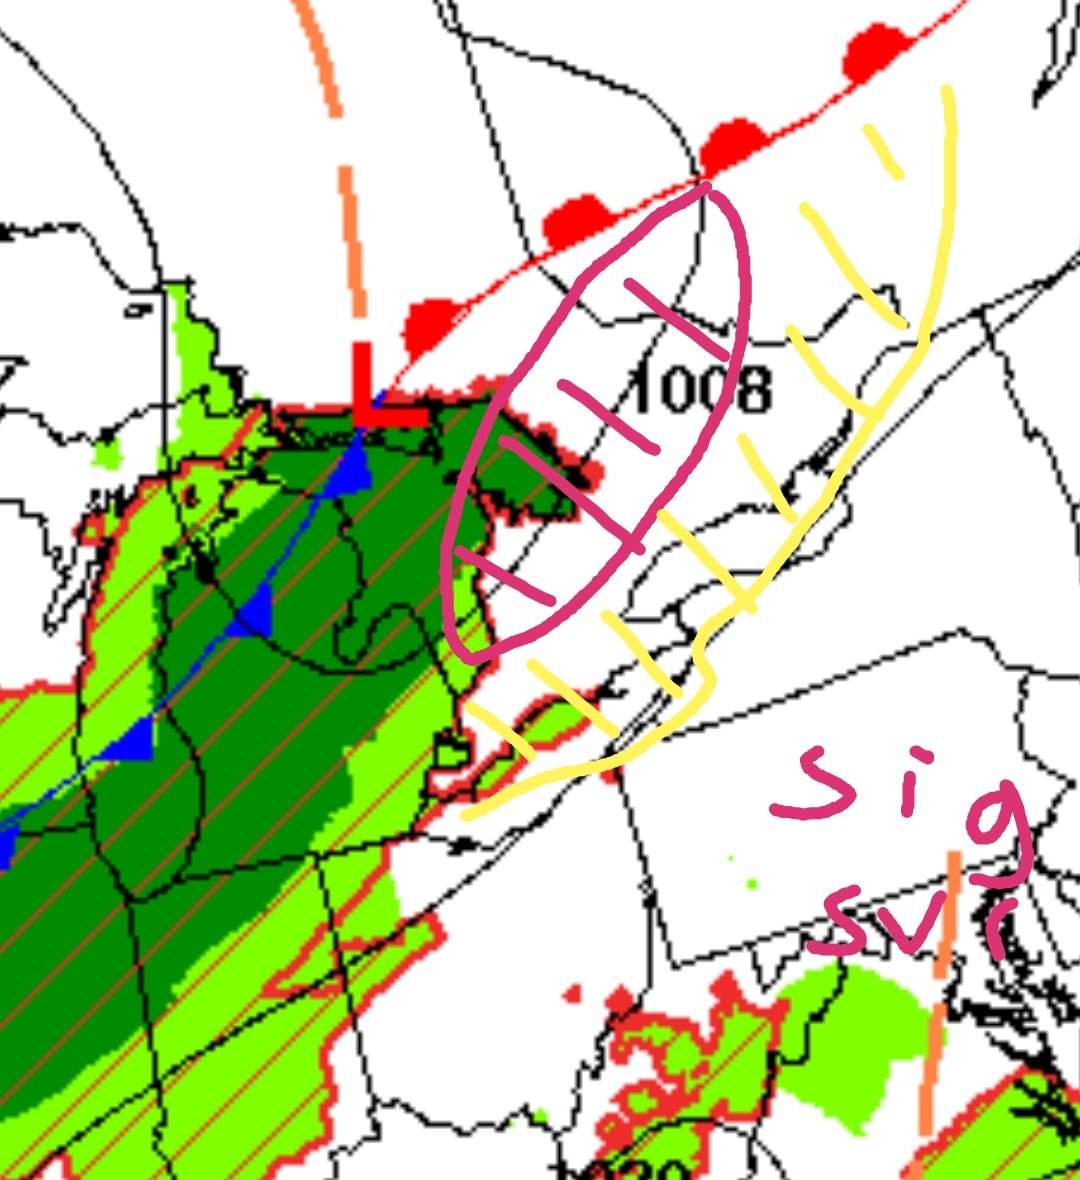 Potent severe weather setup across Ontario Thursday. An area of low pressure will cross the border into Sault Ste. Marie around the noon hour translating northeastwards towards the Temiskamimg Shores by mid-afternoon. Concurrently, a shortwave trough #ONStorm #onwx 1/ https://t.co/zB5Wnp3oWS